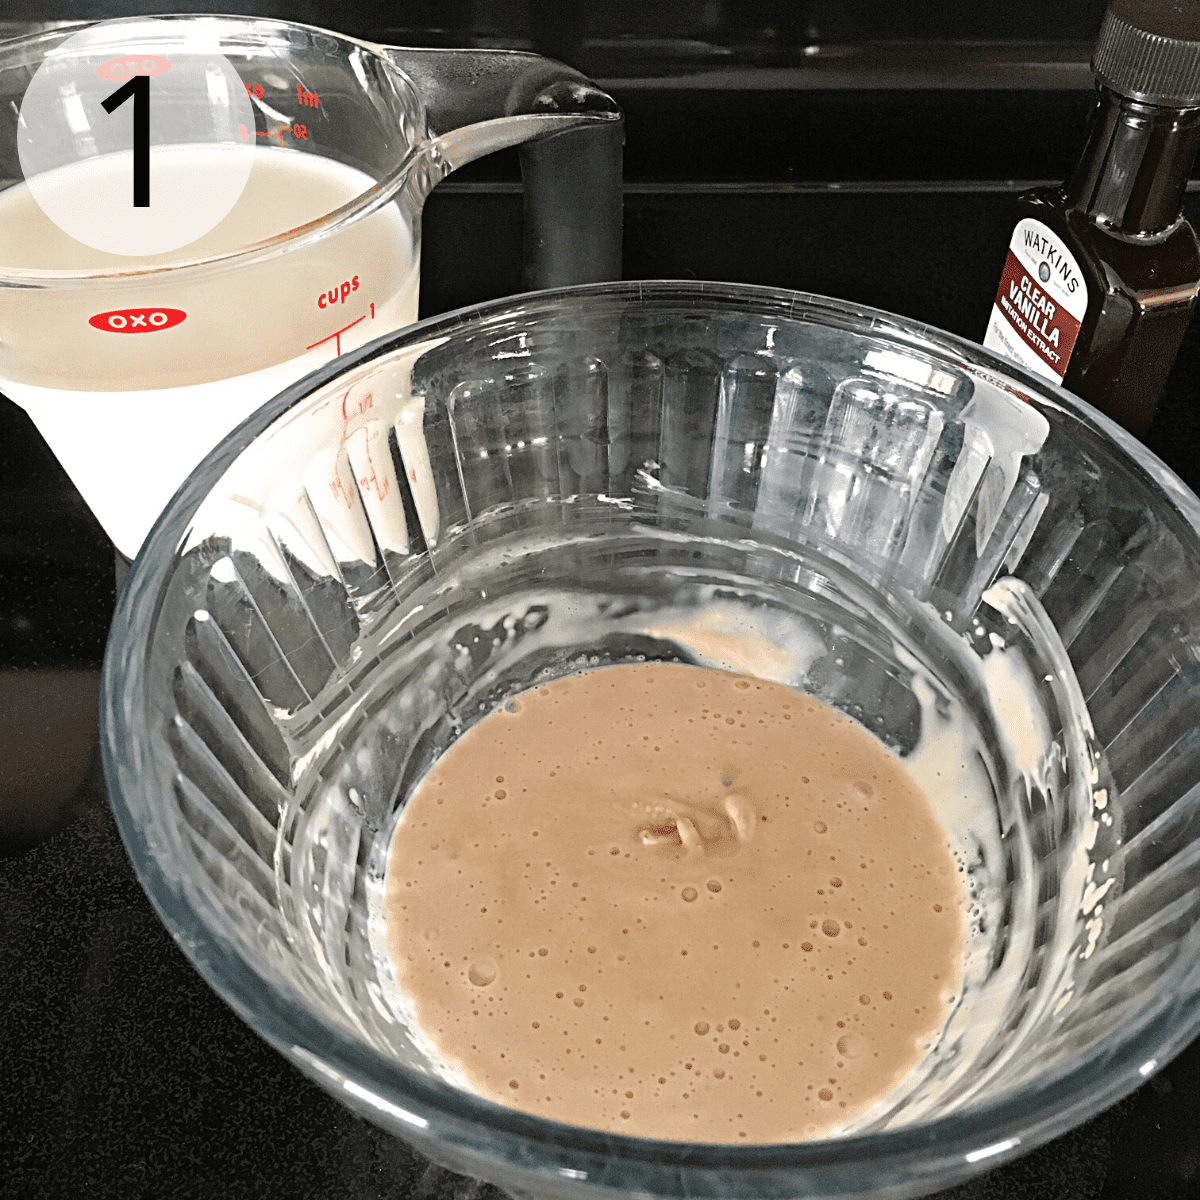 Mixing active dry yeast, sugar and water to proof the yeast.